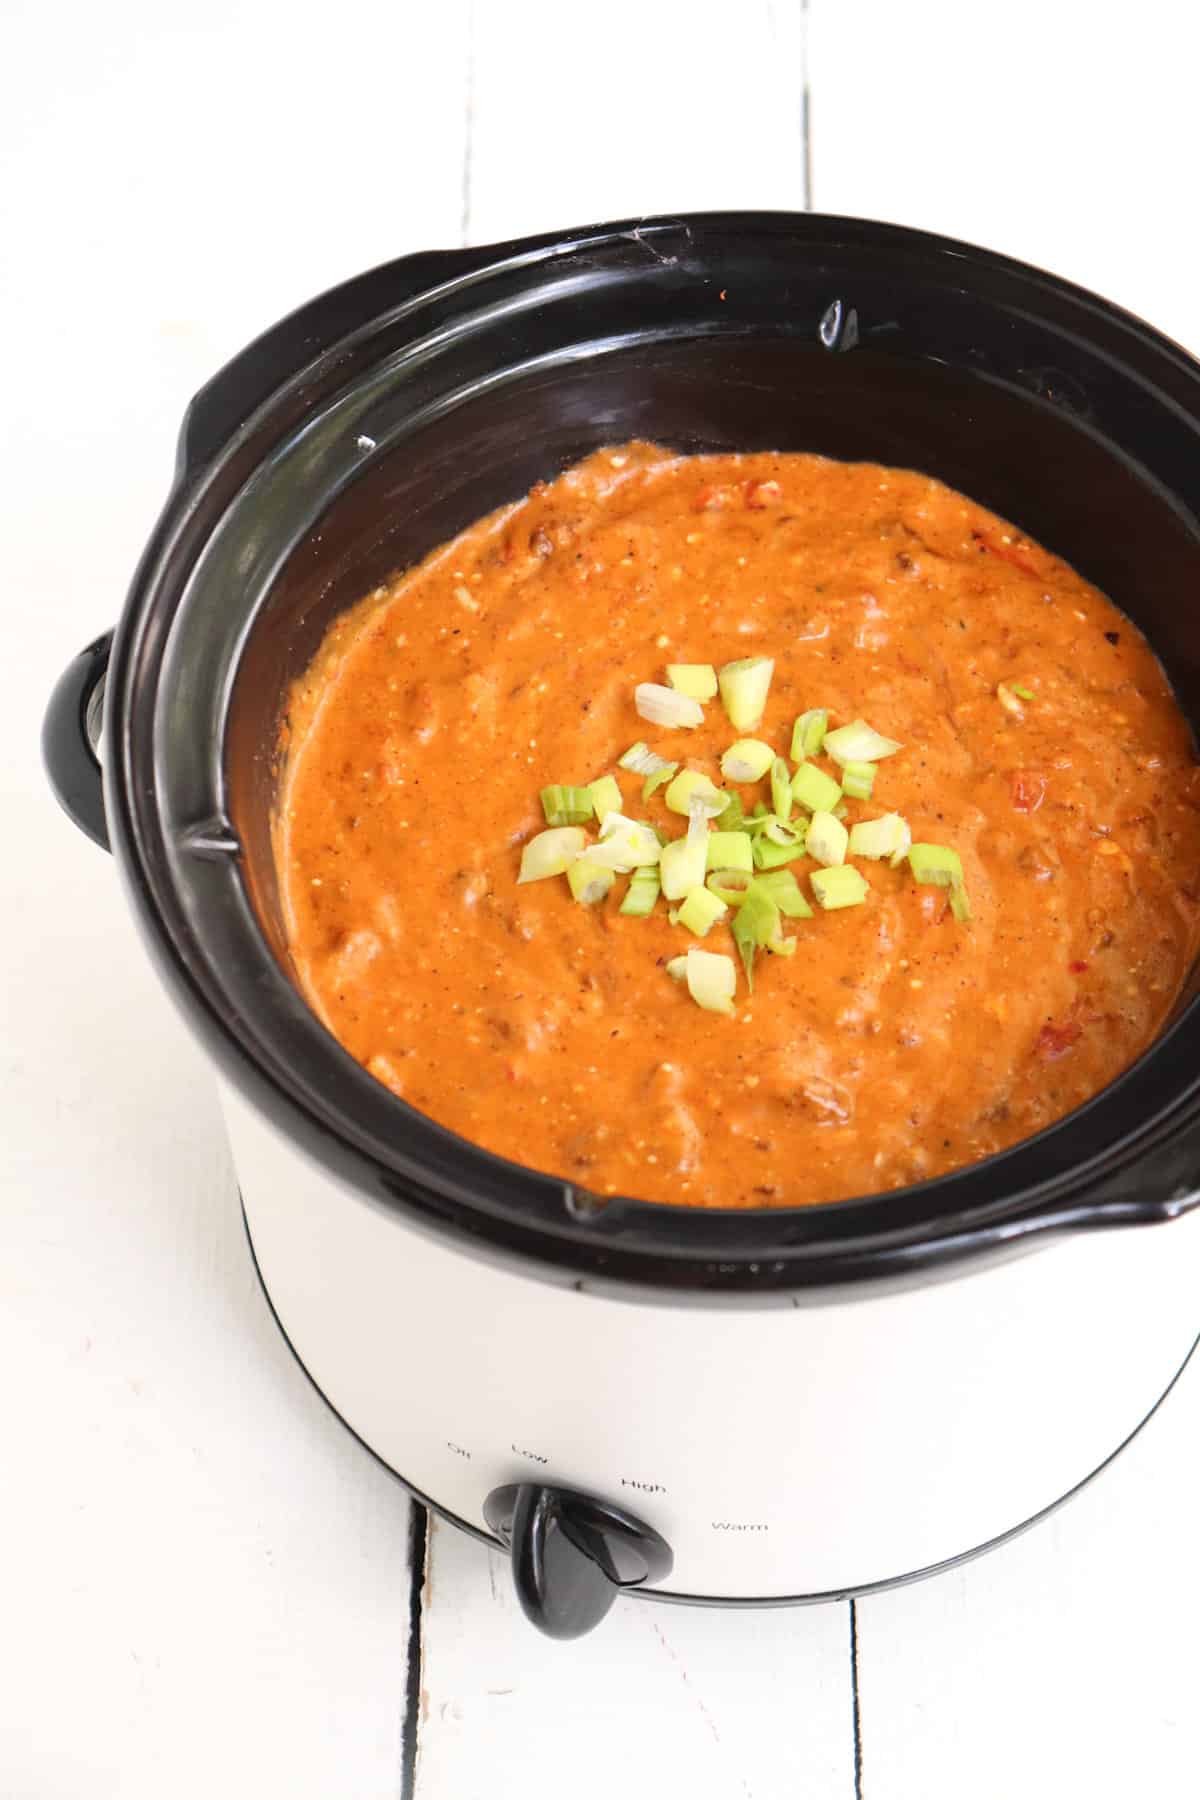 Slow Cooker Chili Cheese Dip, Recipe